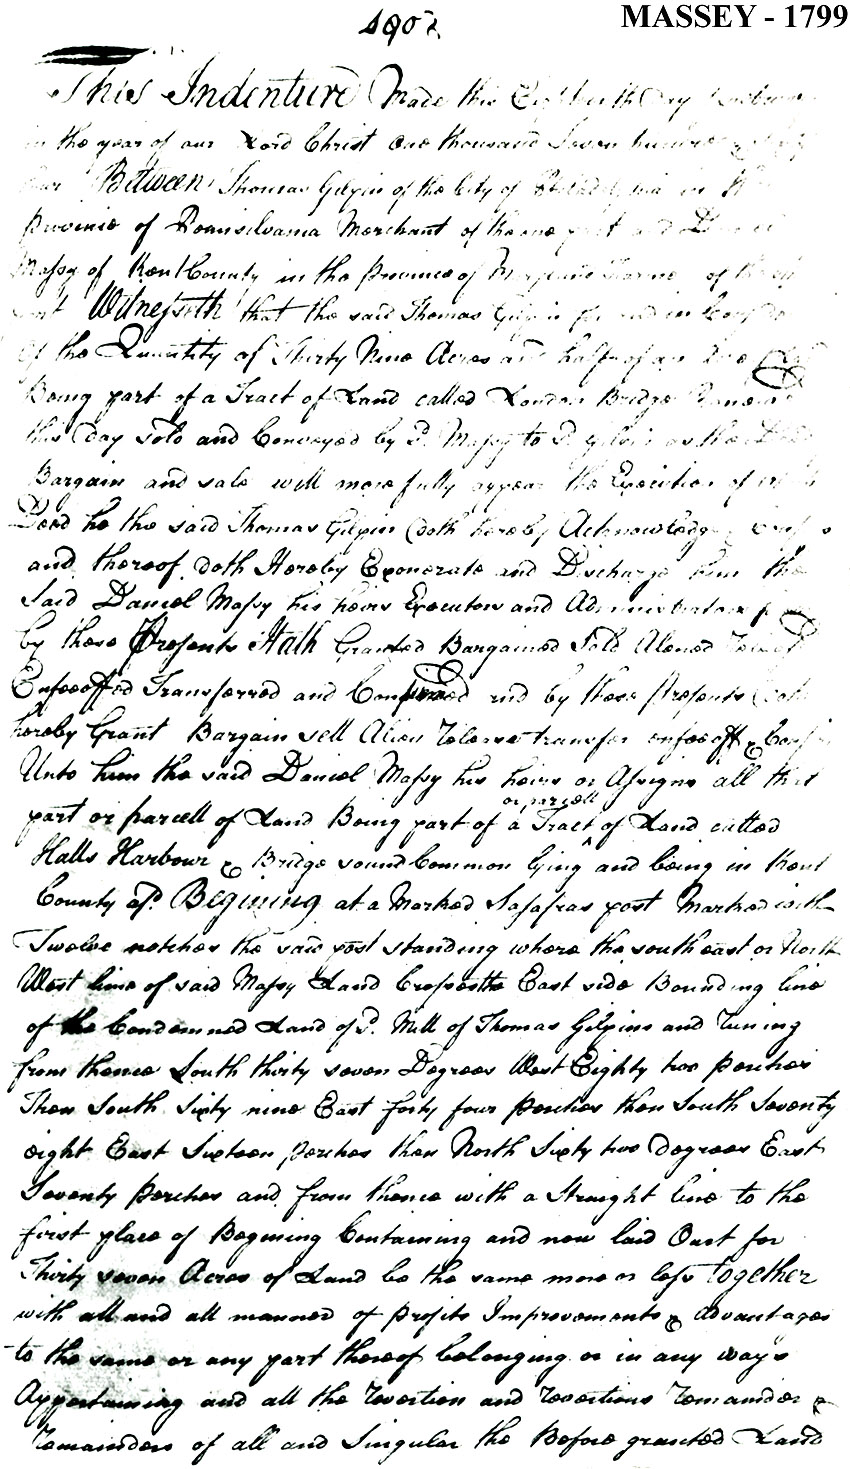 Maryland Land Records, Kent County, Thomas Gilpin to Daniel Massey, March 5, 1764